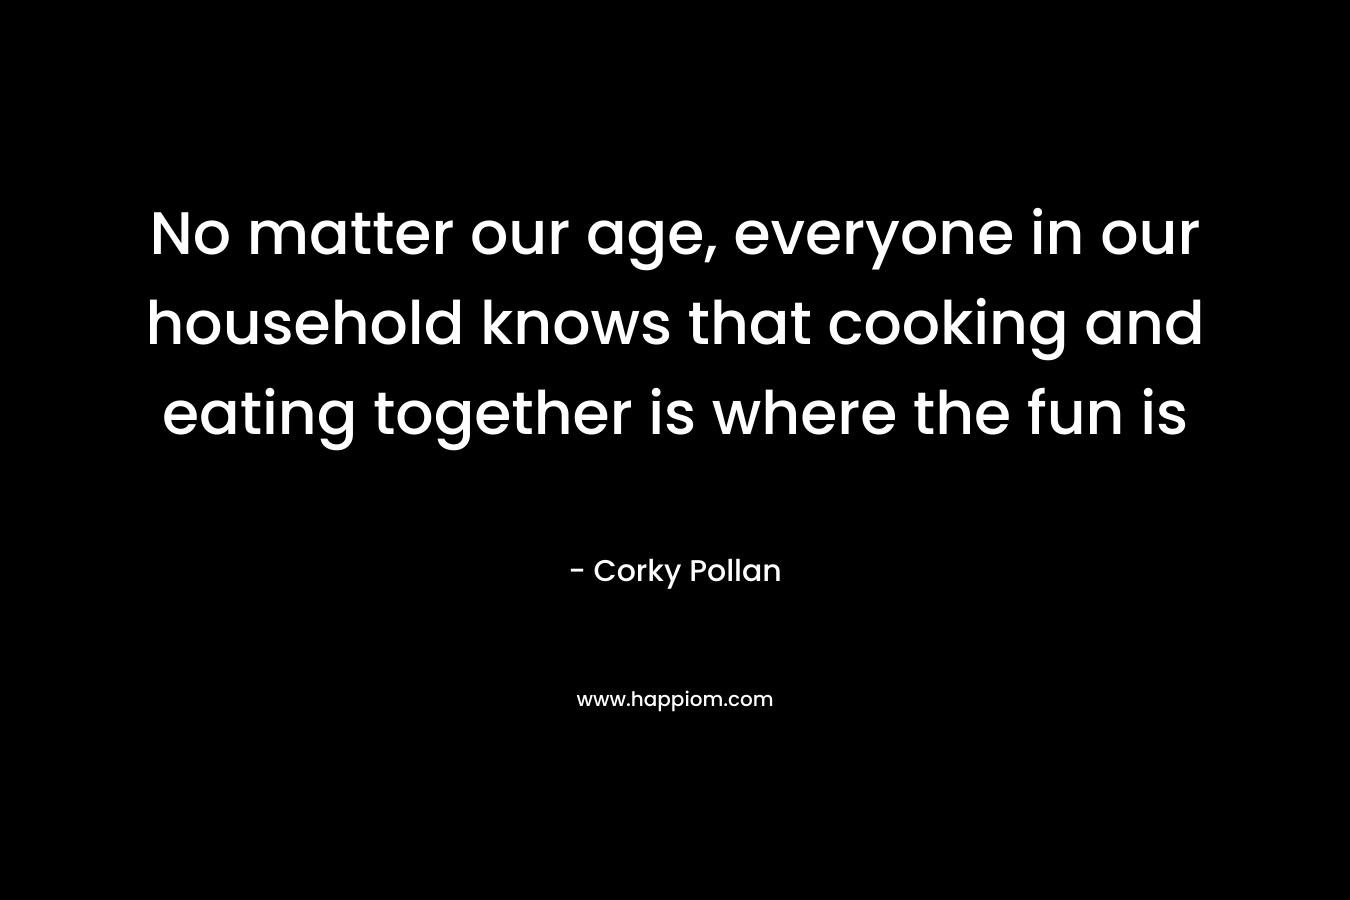 No matter our age, everyone in our household knows that cooking and eating together is where the fun is – Corky Pollan